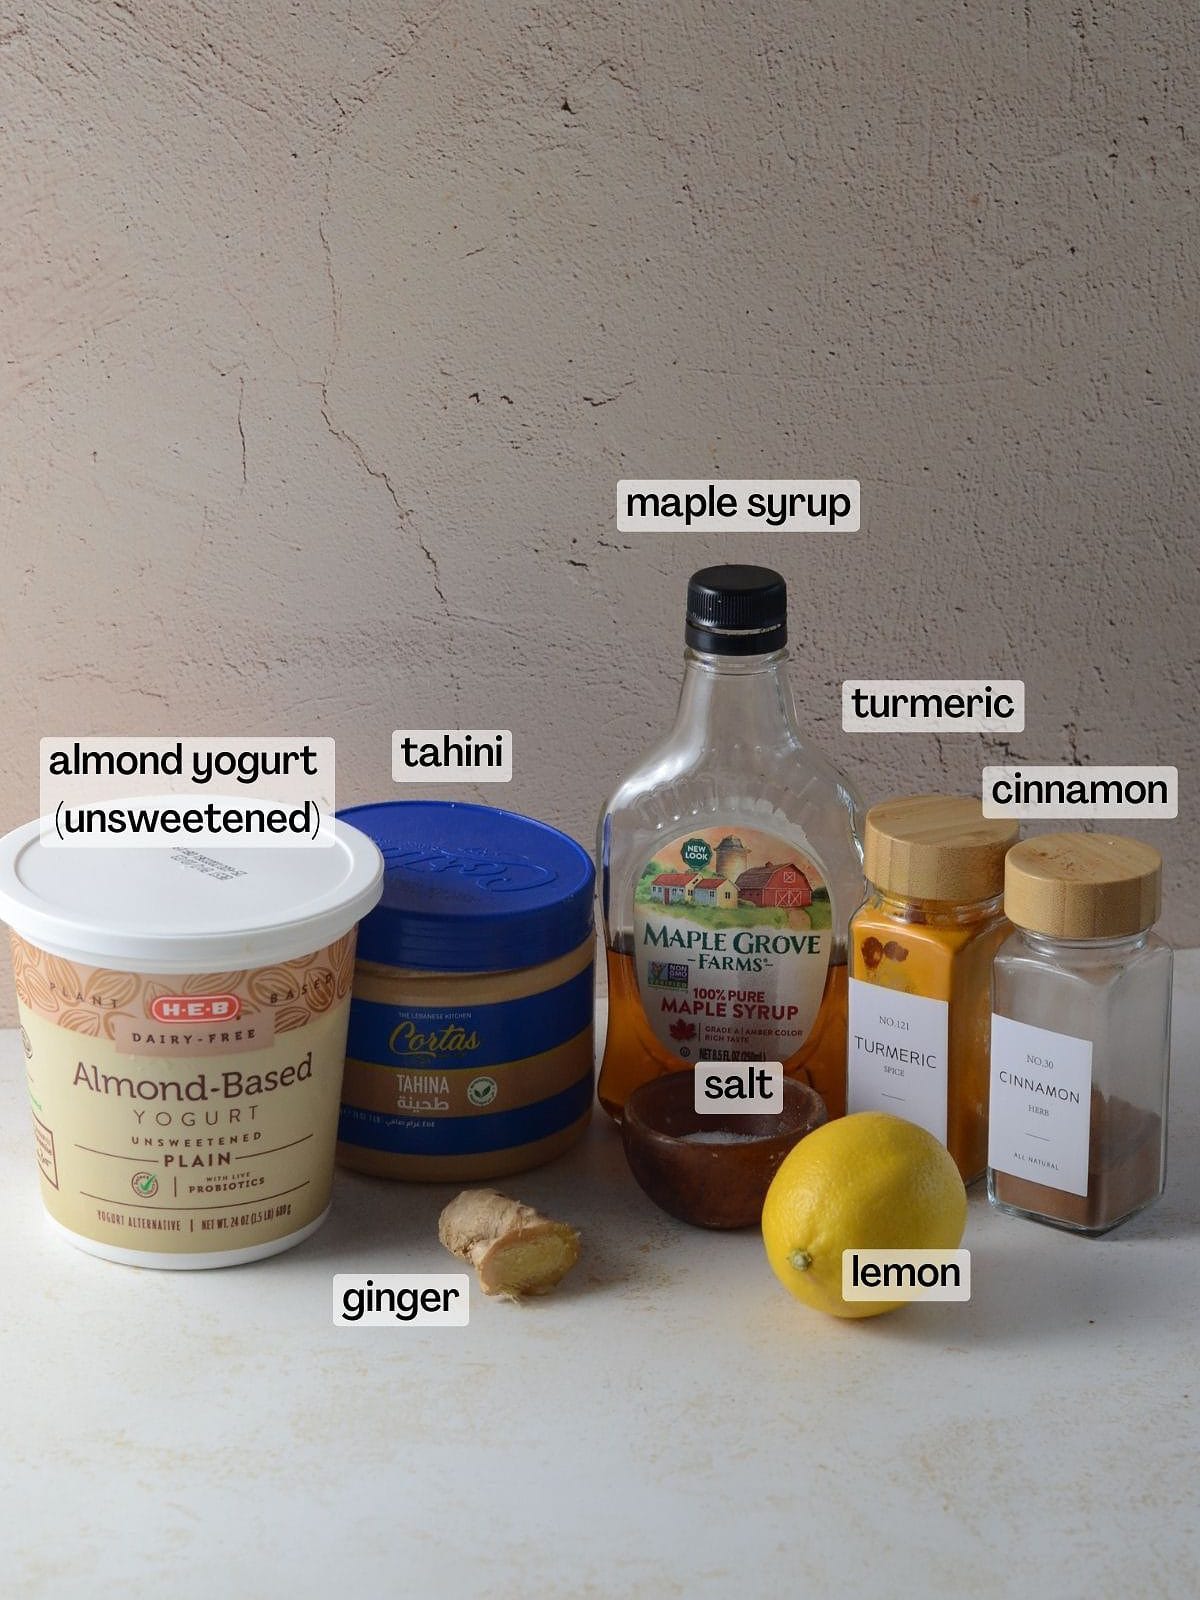 This is a photo of ingredients for the lemon ginger sauce.